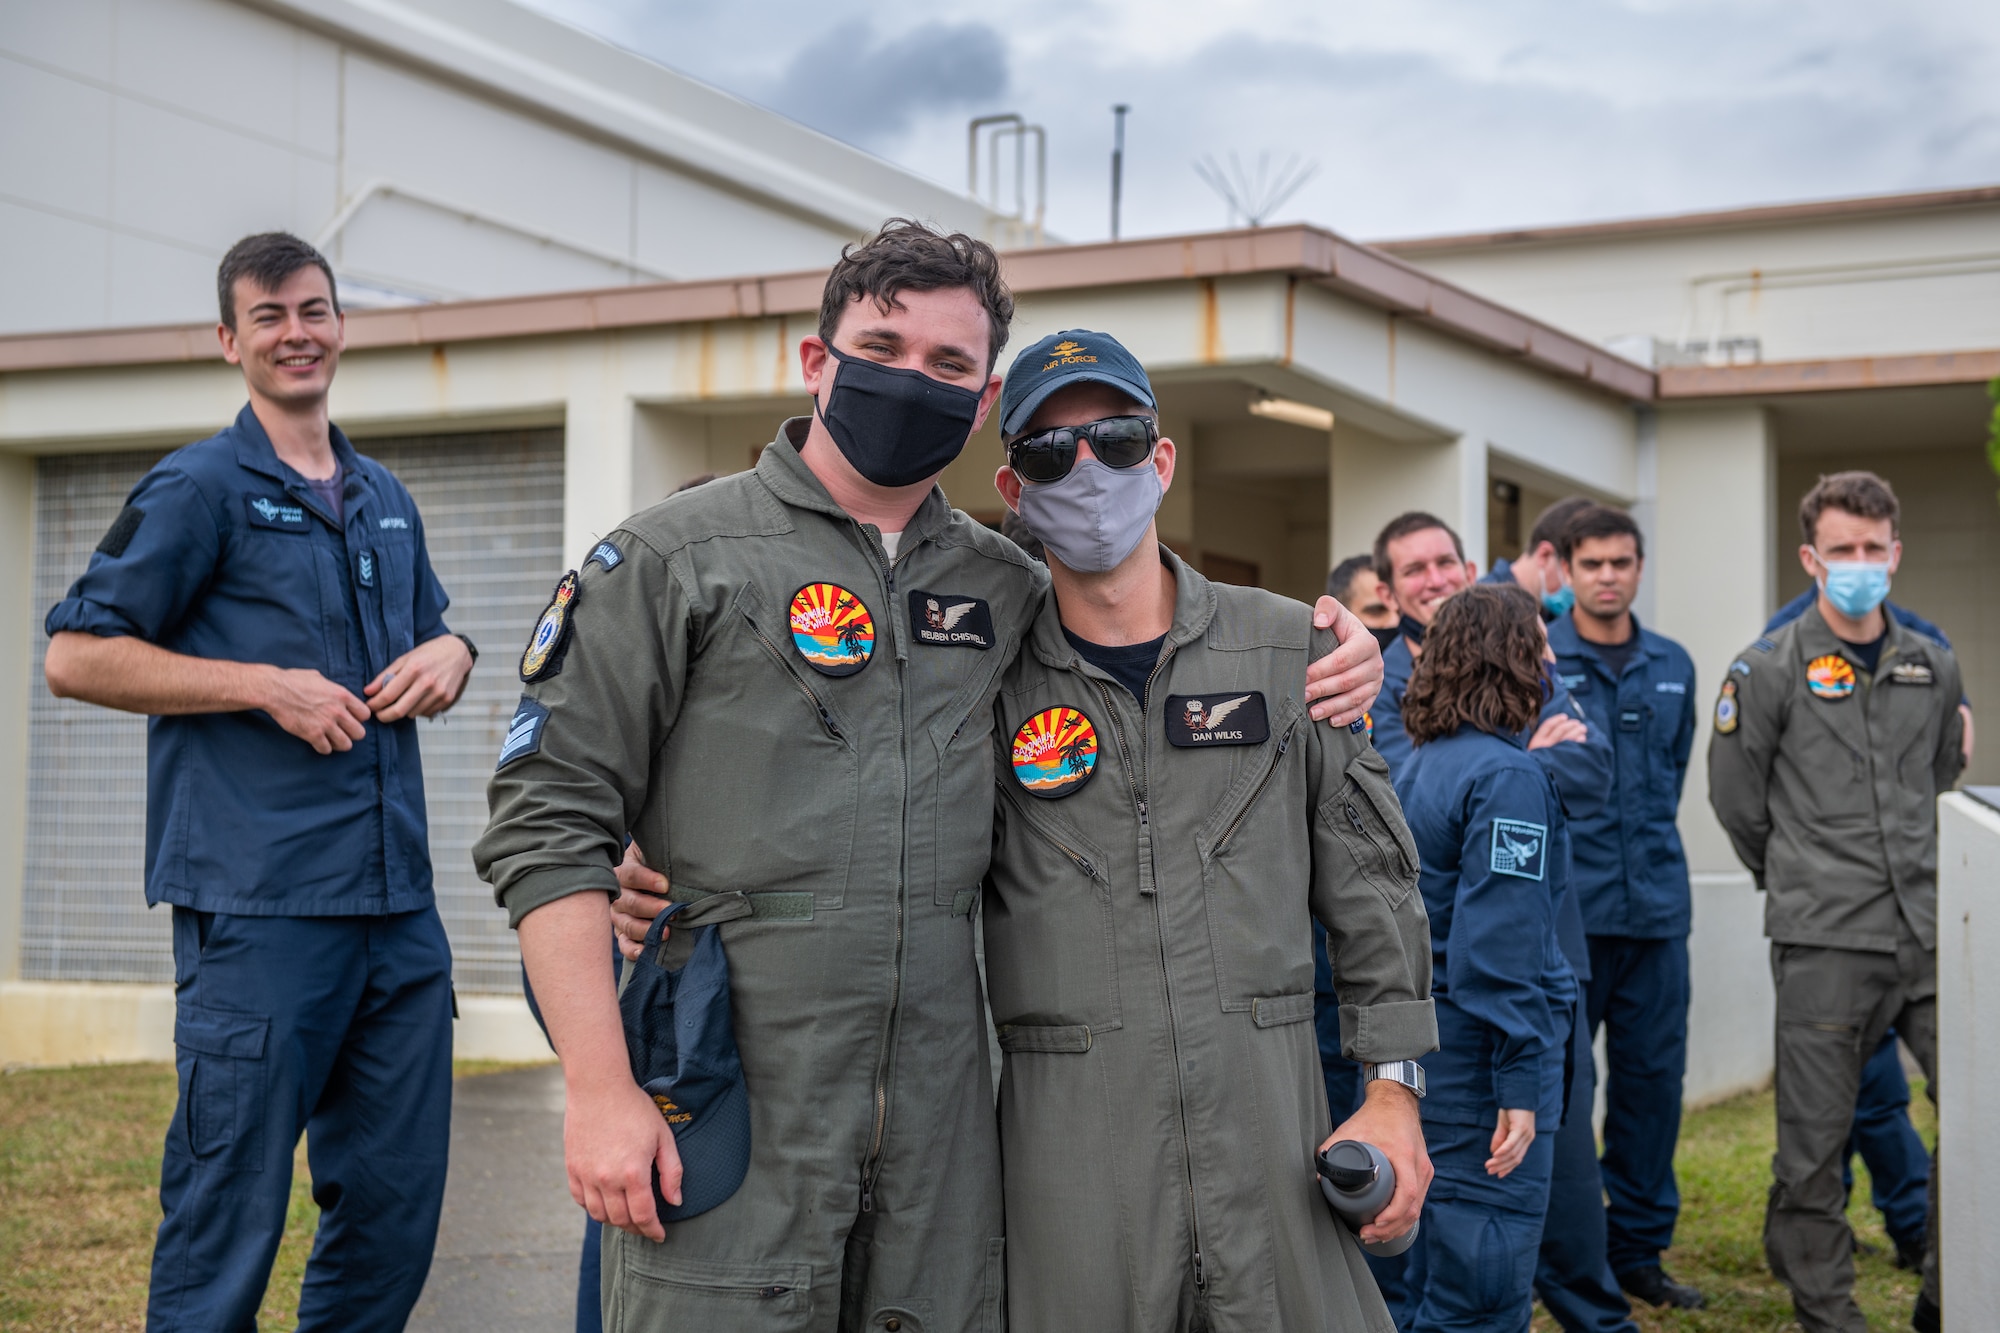 Two military members from New Zealand pose for a photo at Kadena Air Base